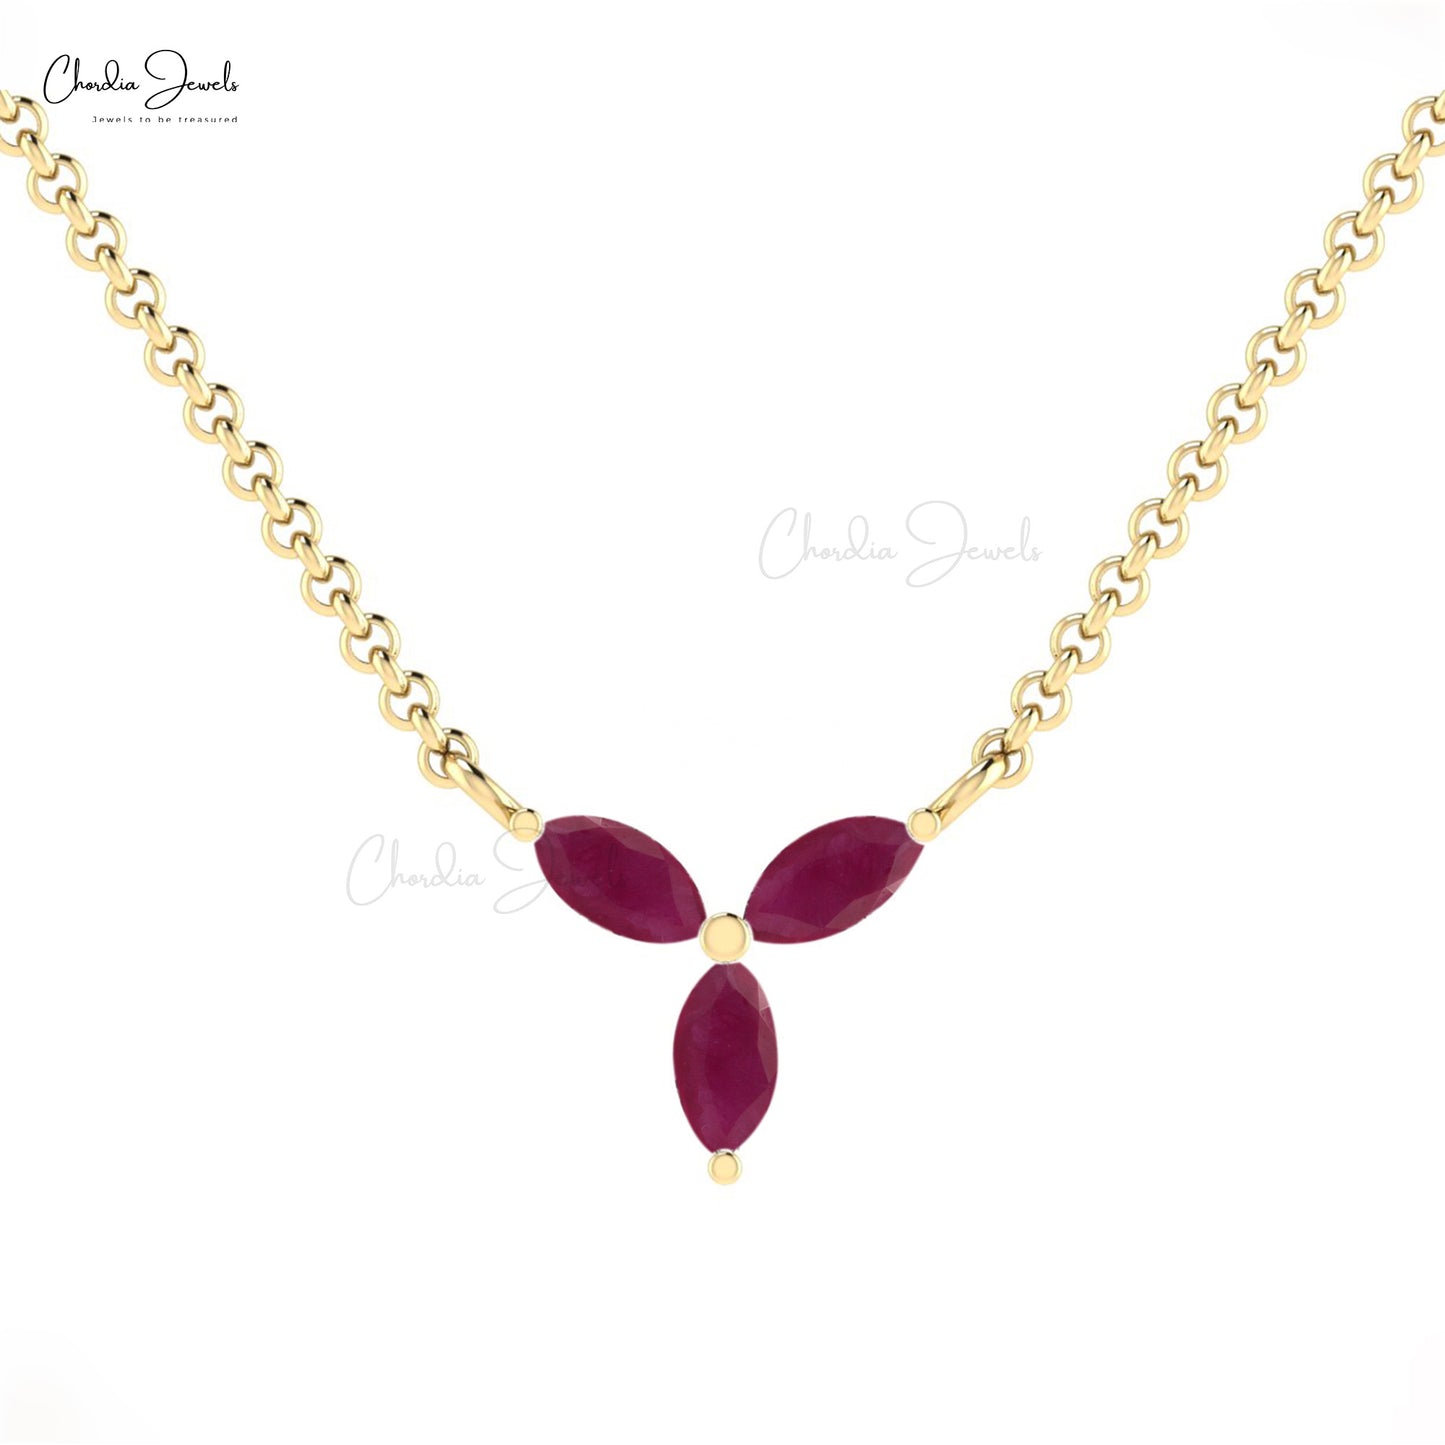 Natural Red Ruby 3-Stone Necklace Pendant With Spring Ring Closure Marquise Shape Gemstone Necklace in 14k Real Gold Valentine's Day Gift